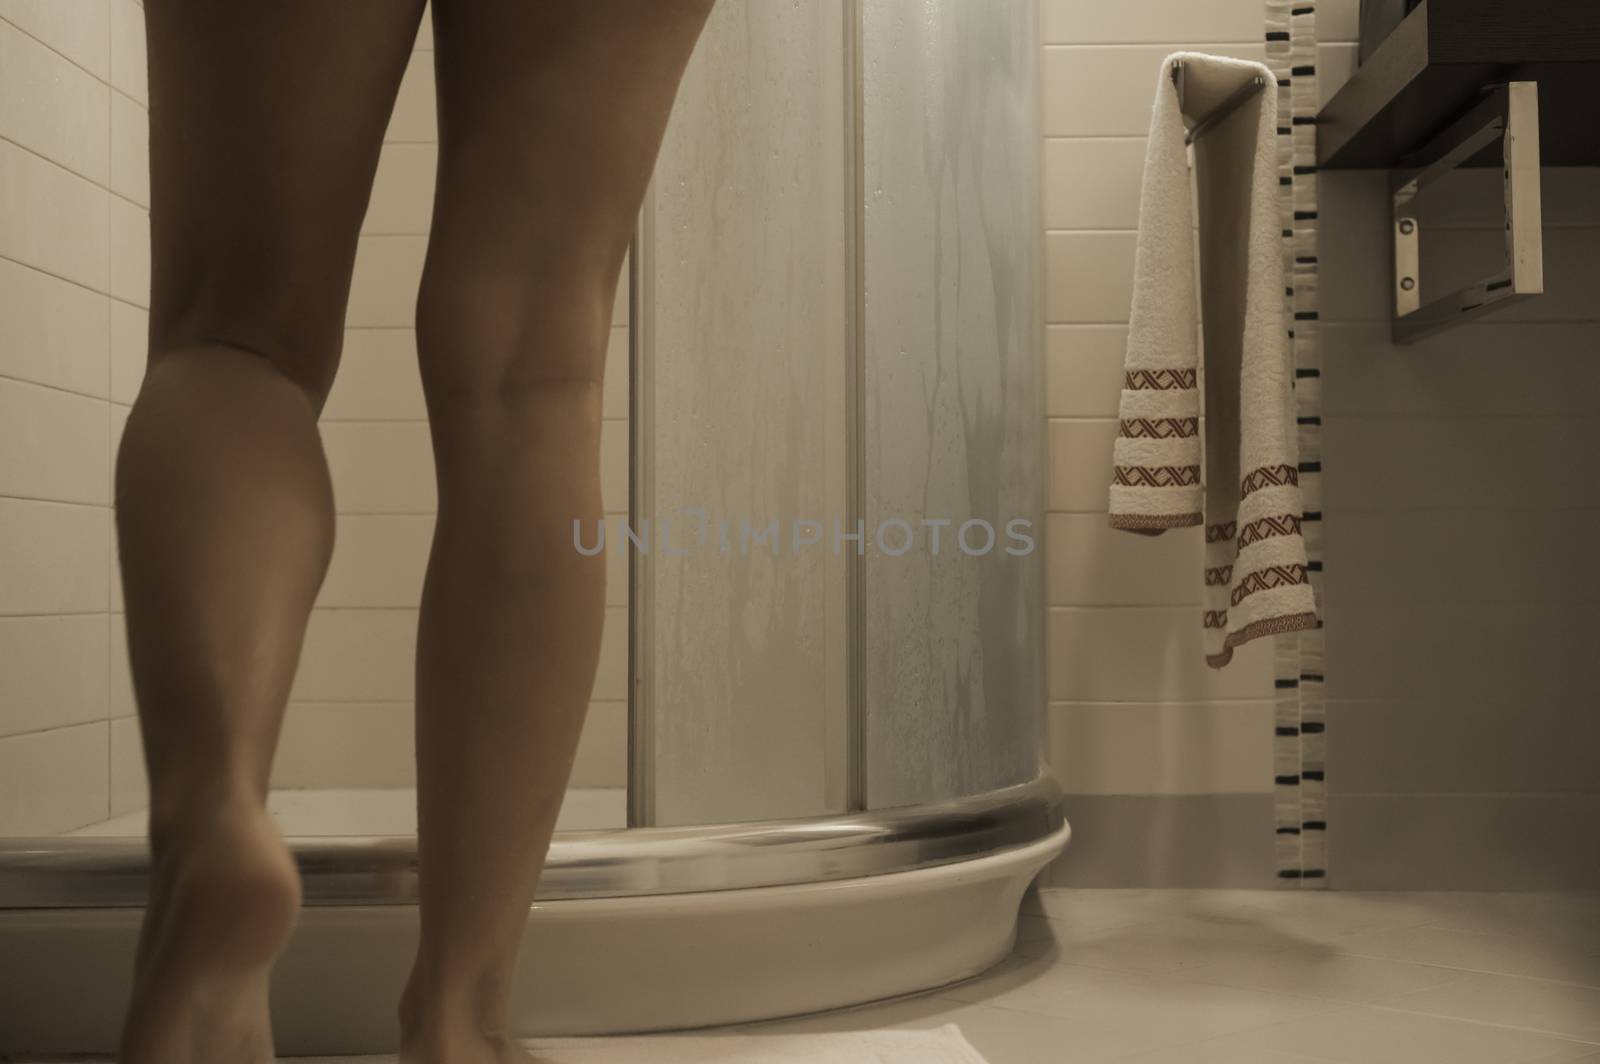 Sexy naked woman's legs entering the foggy glass shower cabin in her modern design bathroom by robbyfontanesi